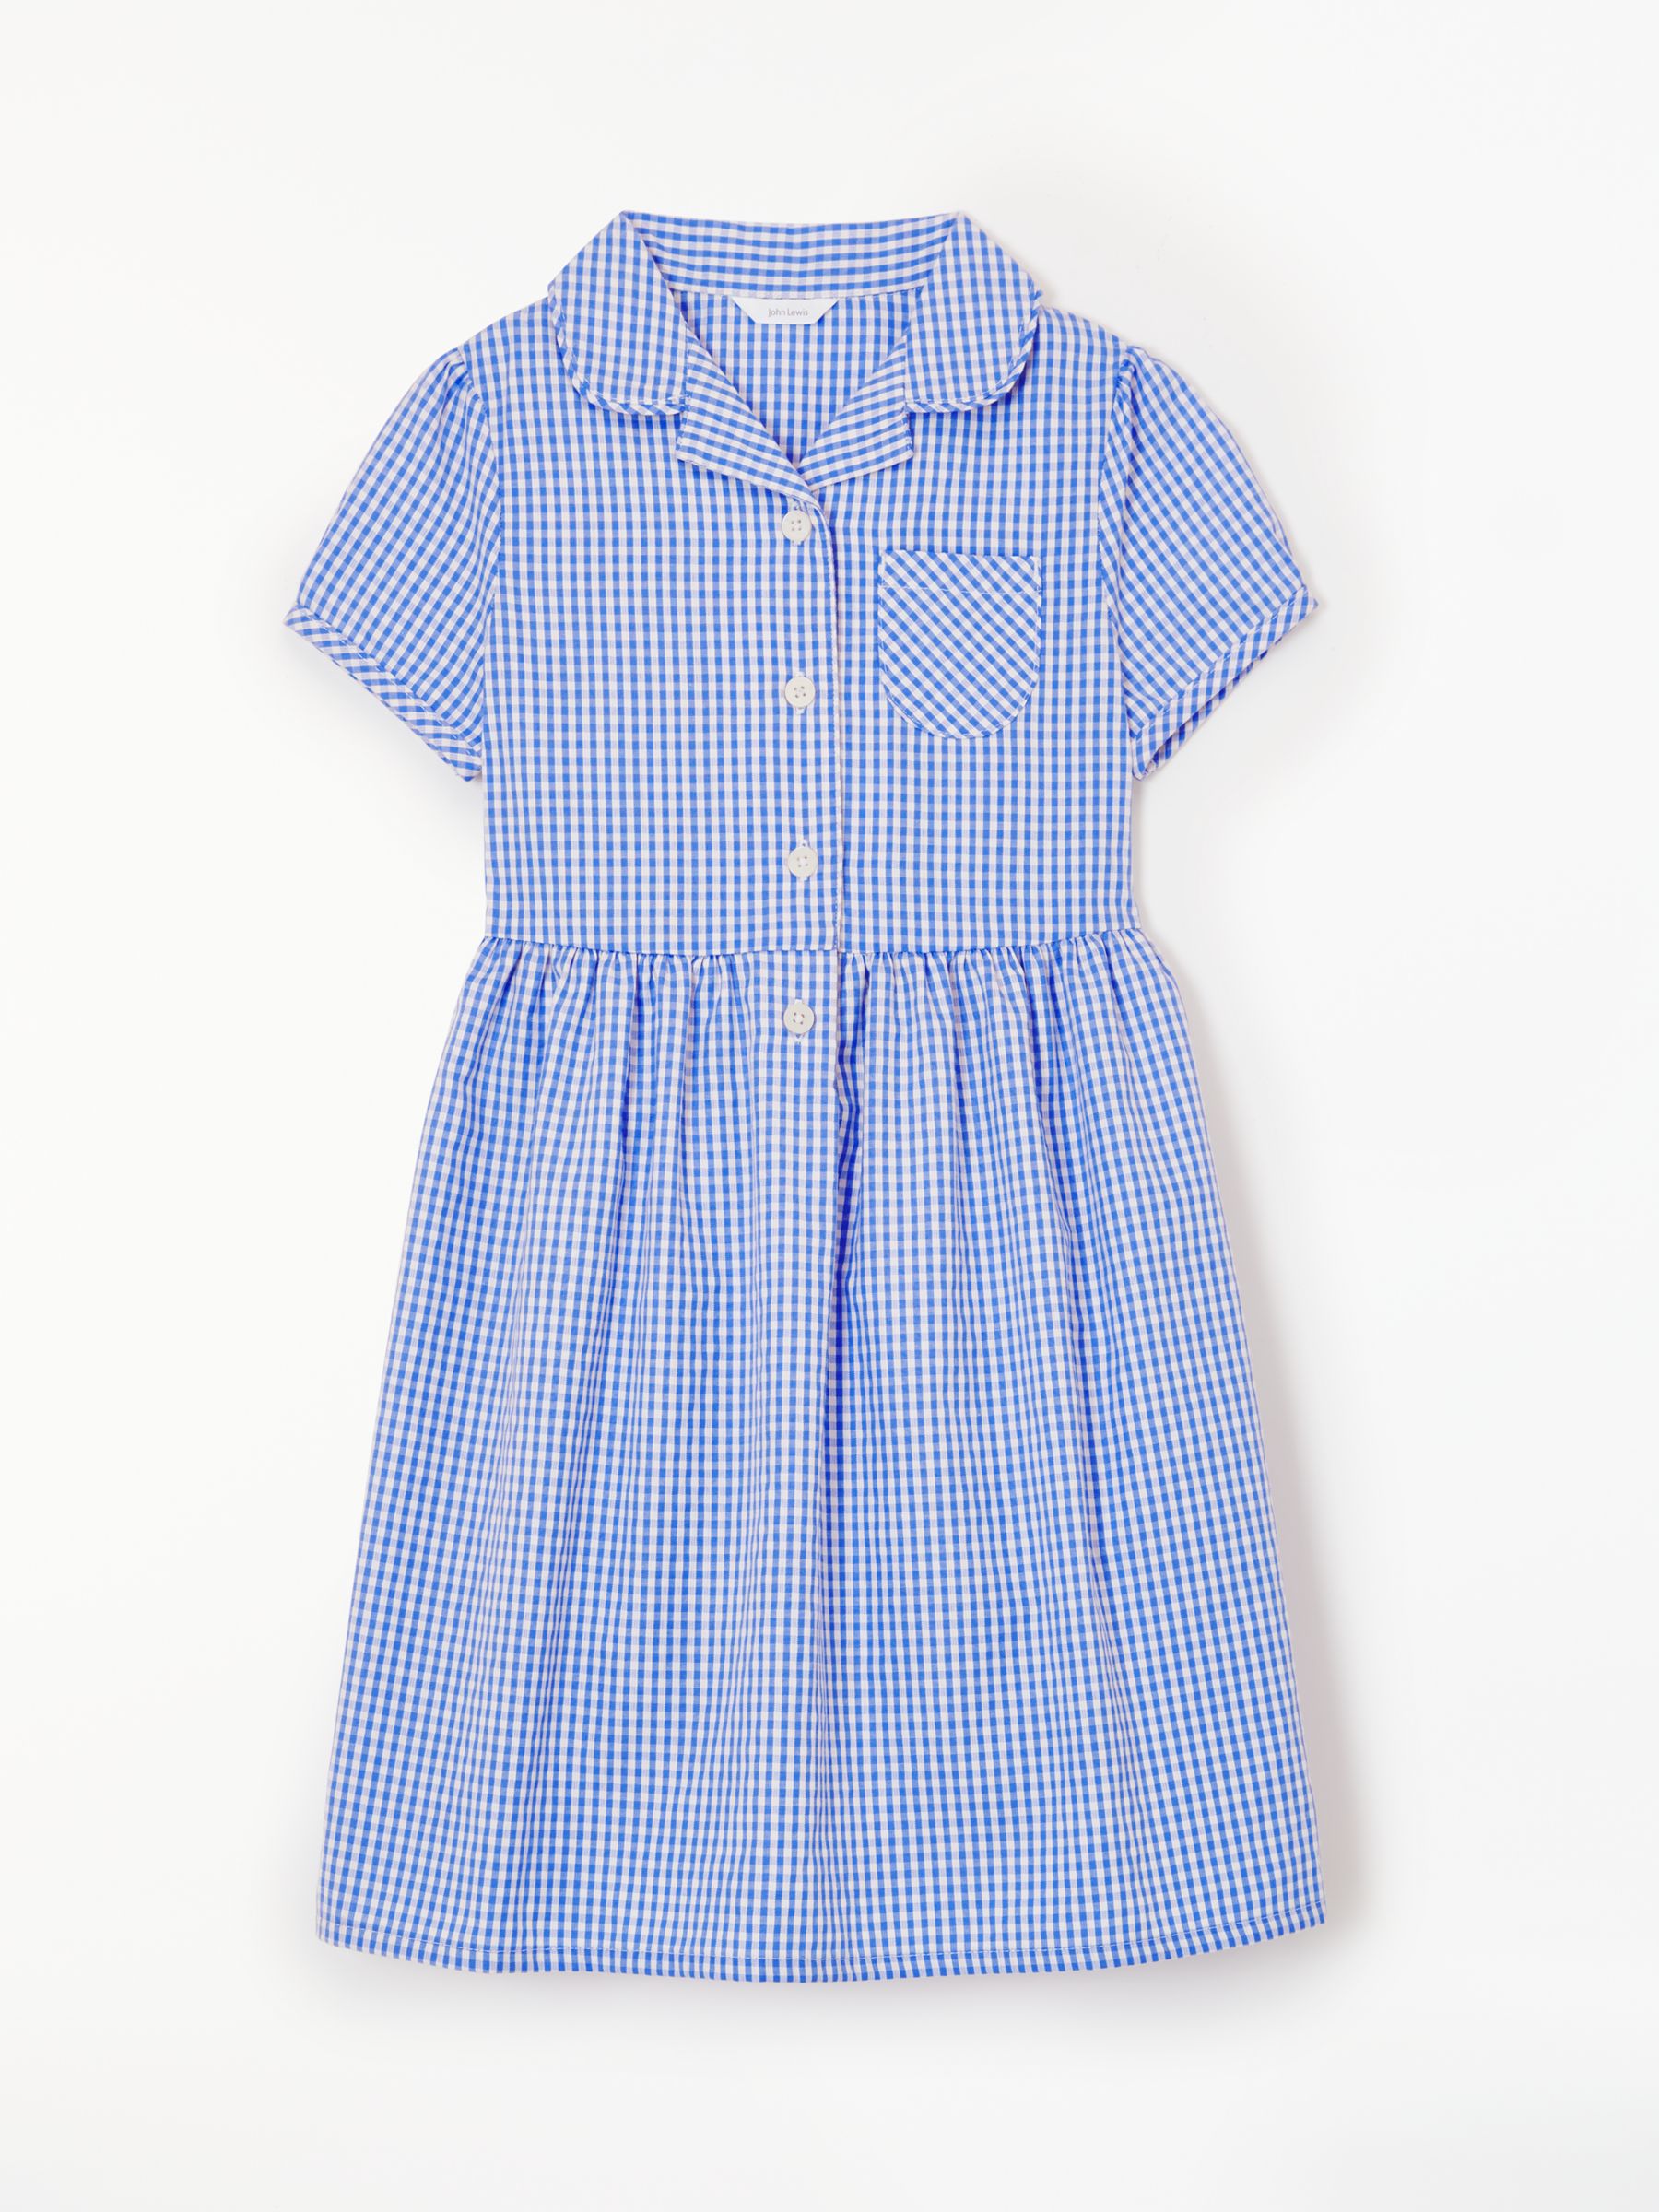 John Lewis & Partners School Belted Gingham Checked Summer Dress, Blue ...